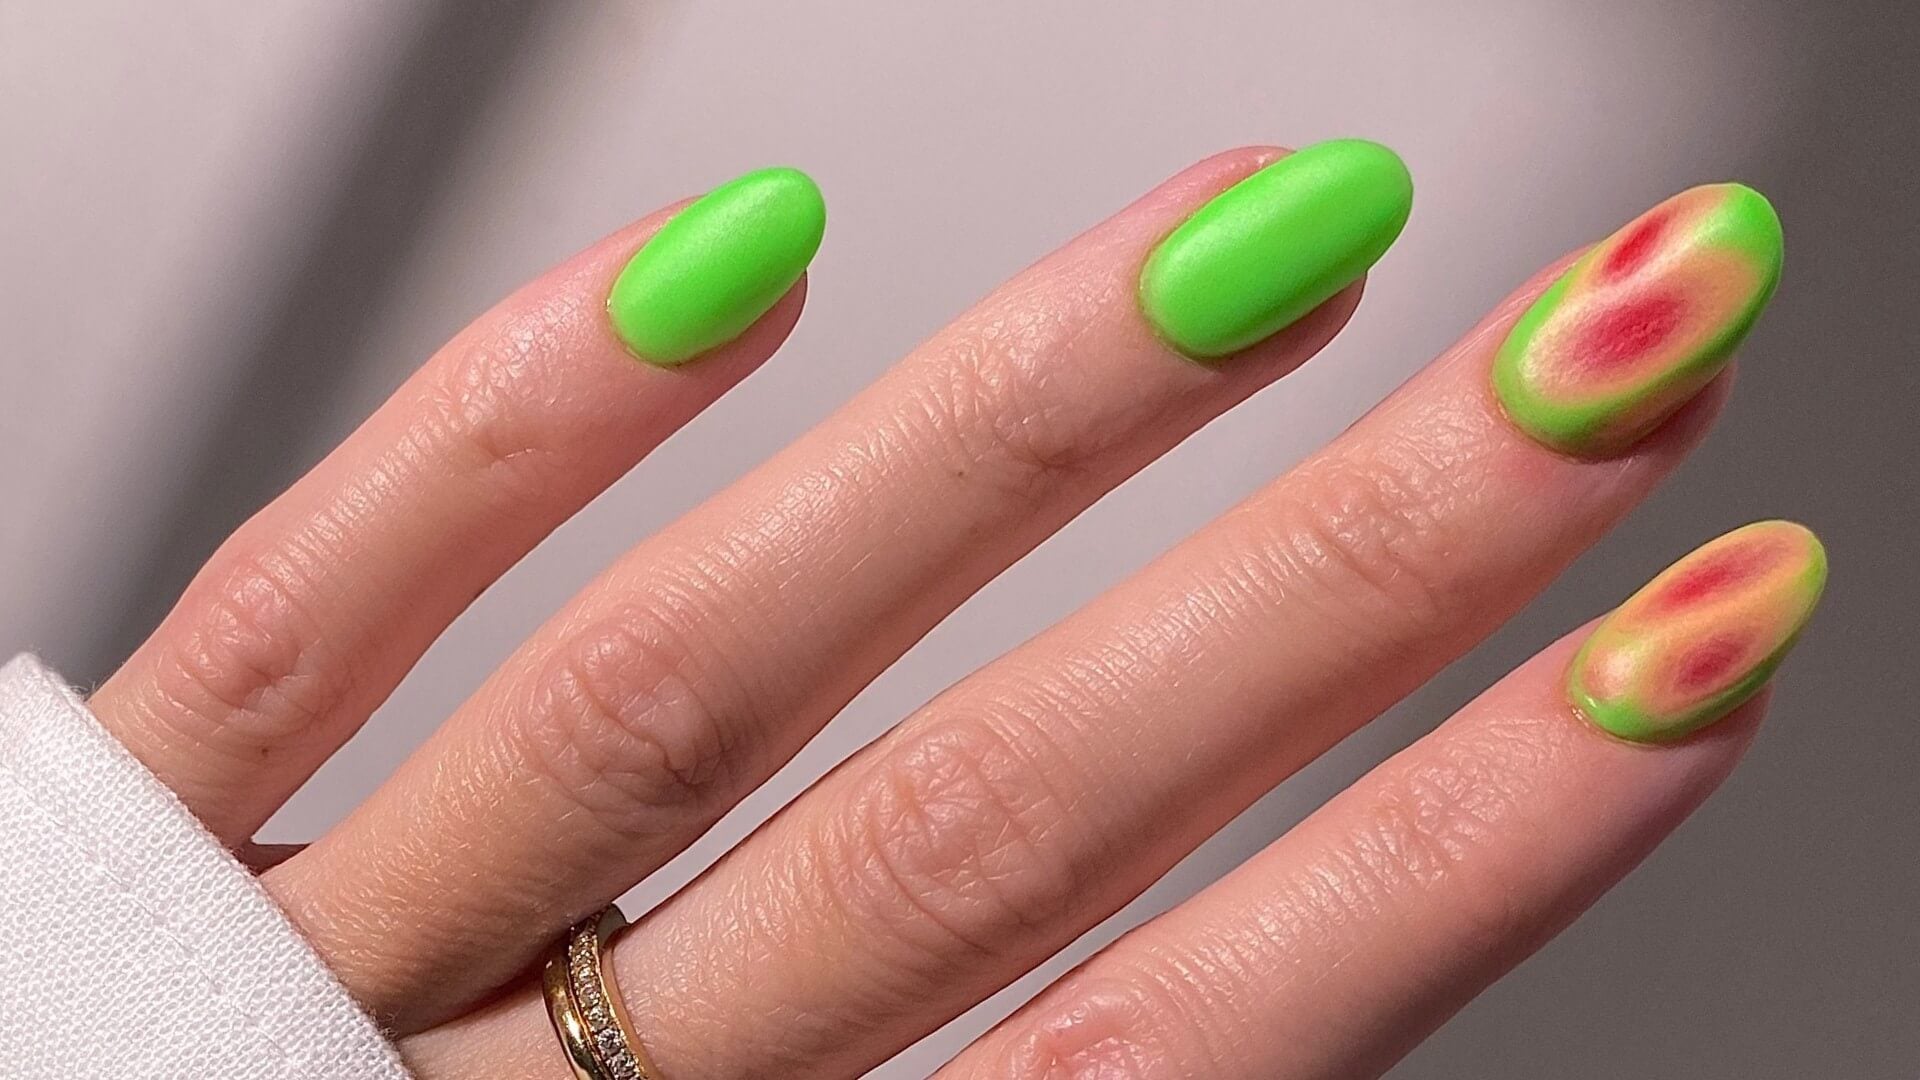 Nails in the neon look